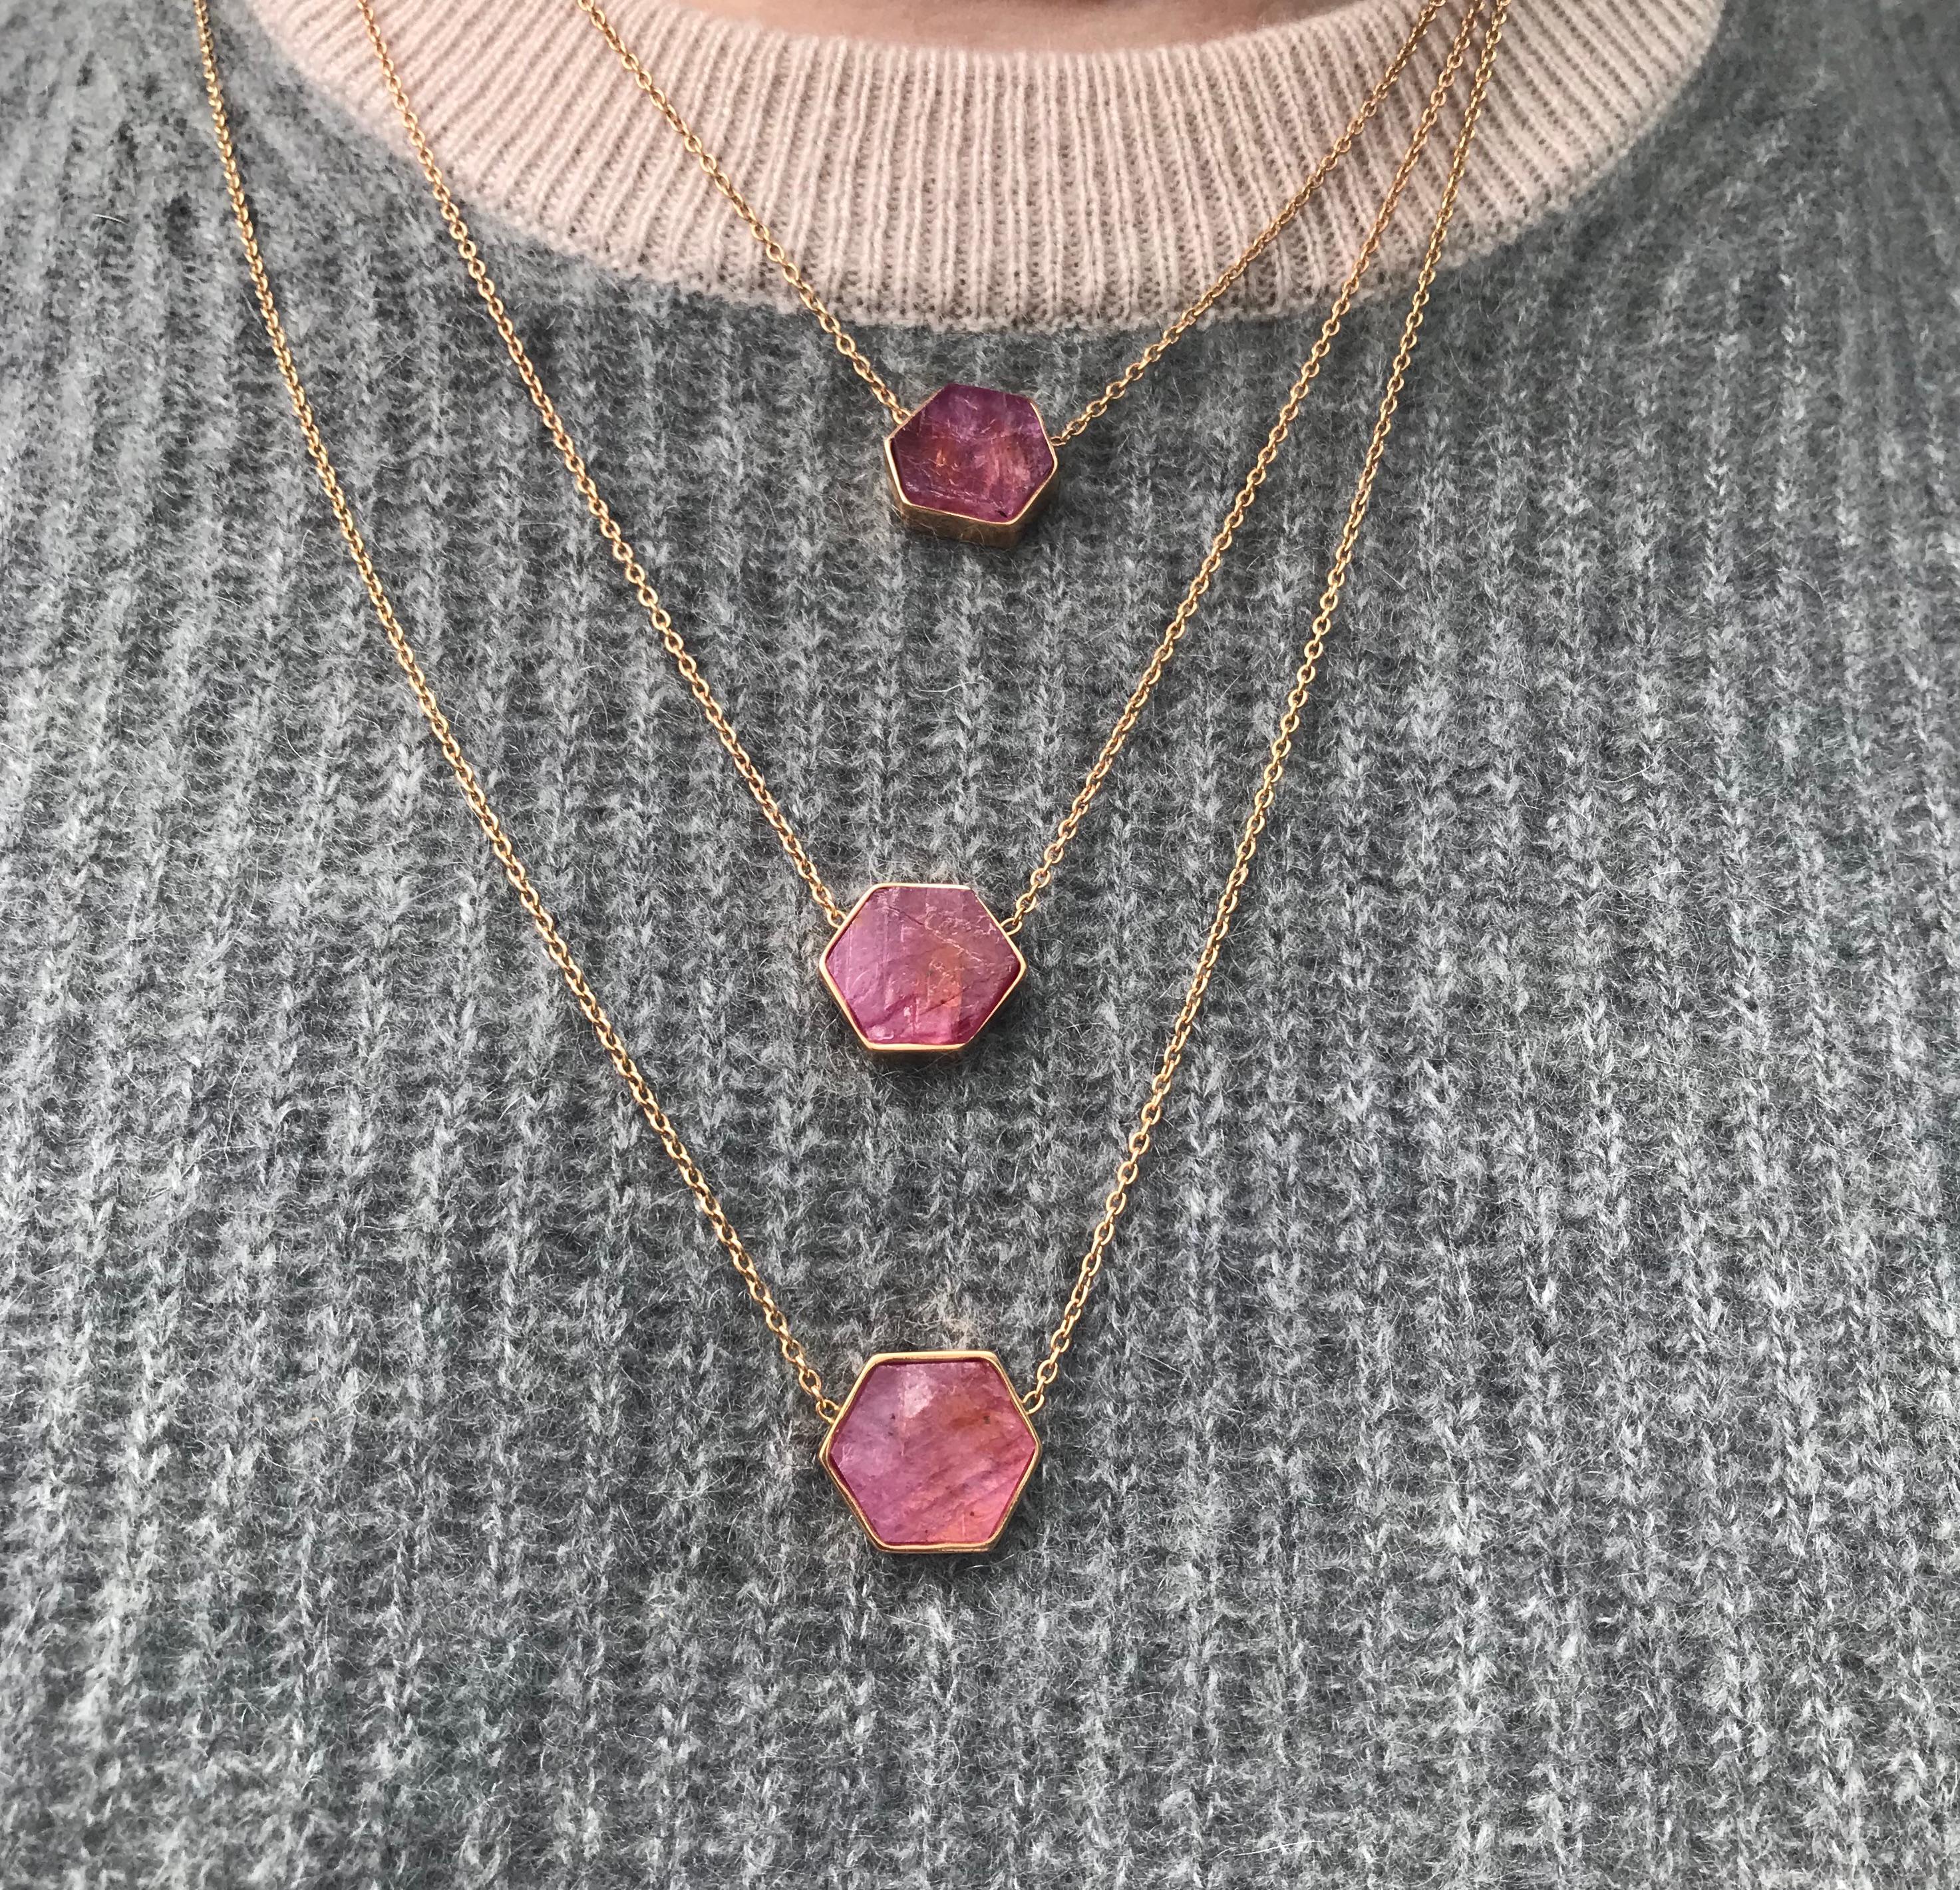 18 Karat Raw Ruby necklace features a custom geometric cut natural ruby chunk framed by an 18k Rose Gold Bezel and hung on a 24 inch 18k Rose Gold chain. 
Includes lobster clasp closure at back of the neck
18k Rose Gold, Natural Ruby
From Karma El